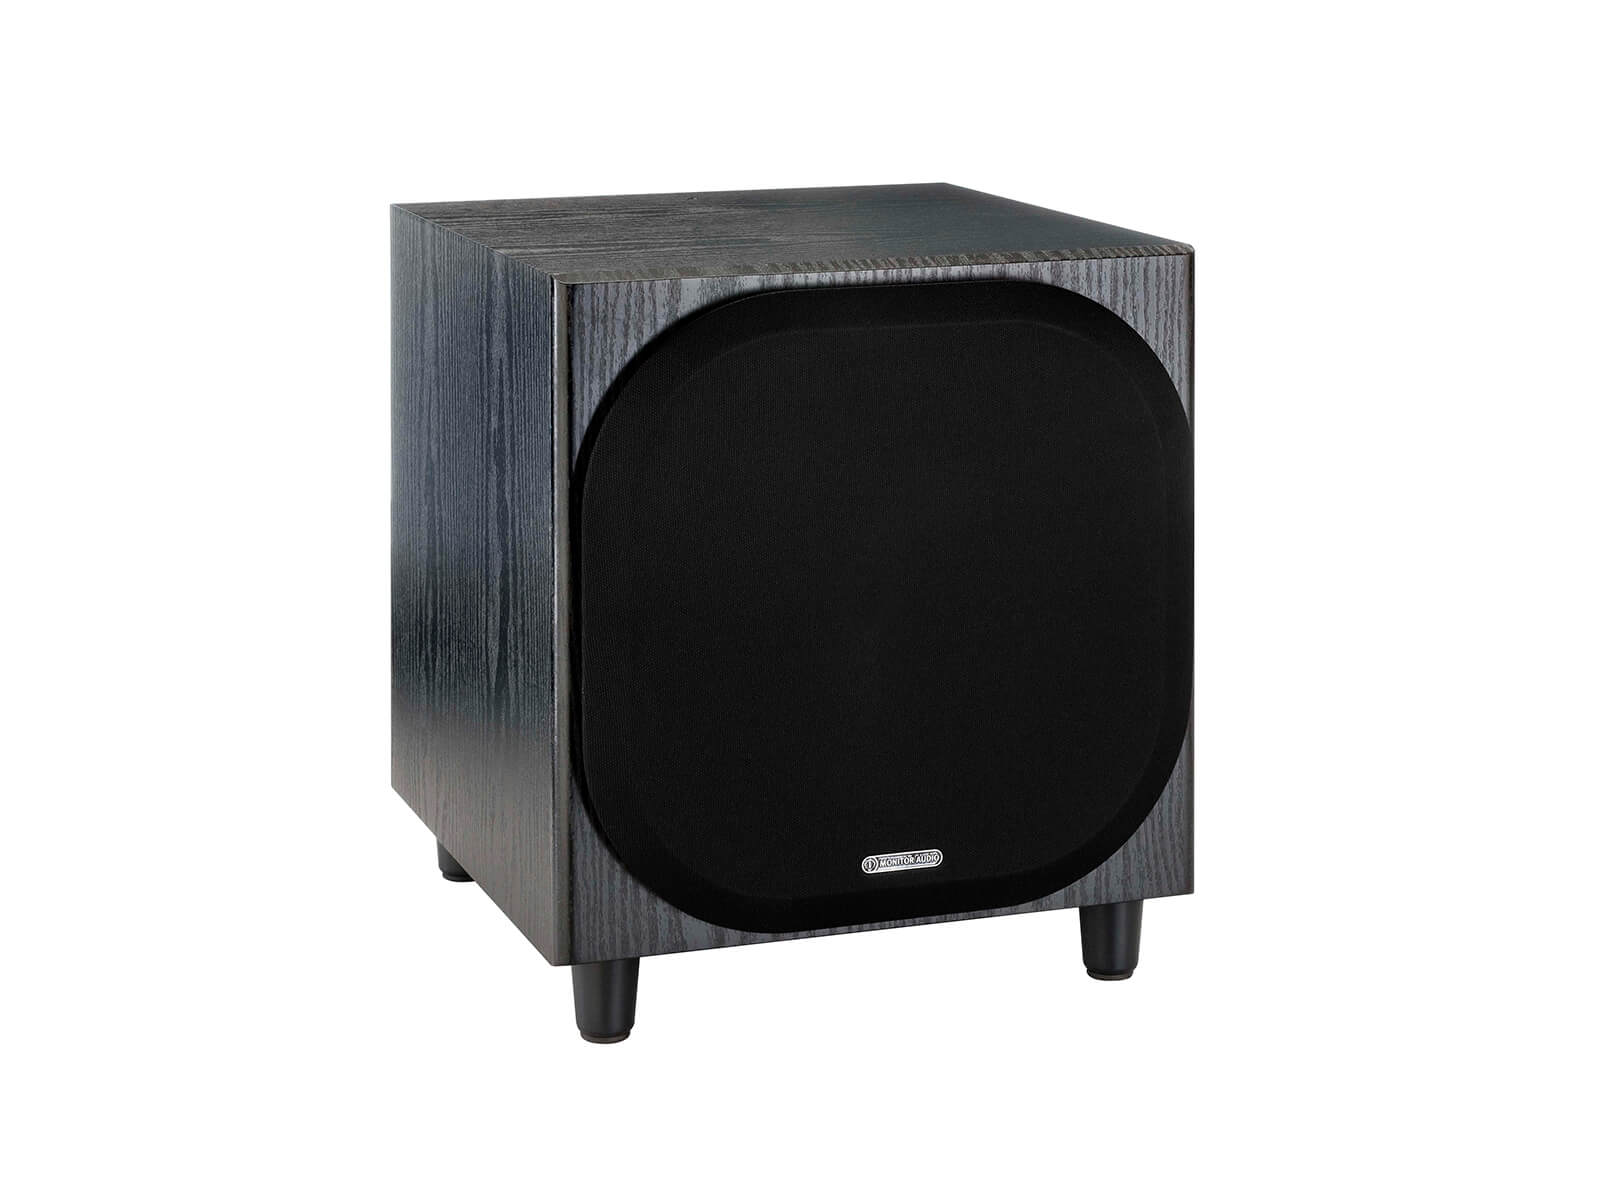 Bronze W10 subwoofer, featuring a grille and a black oak vinyl finish.